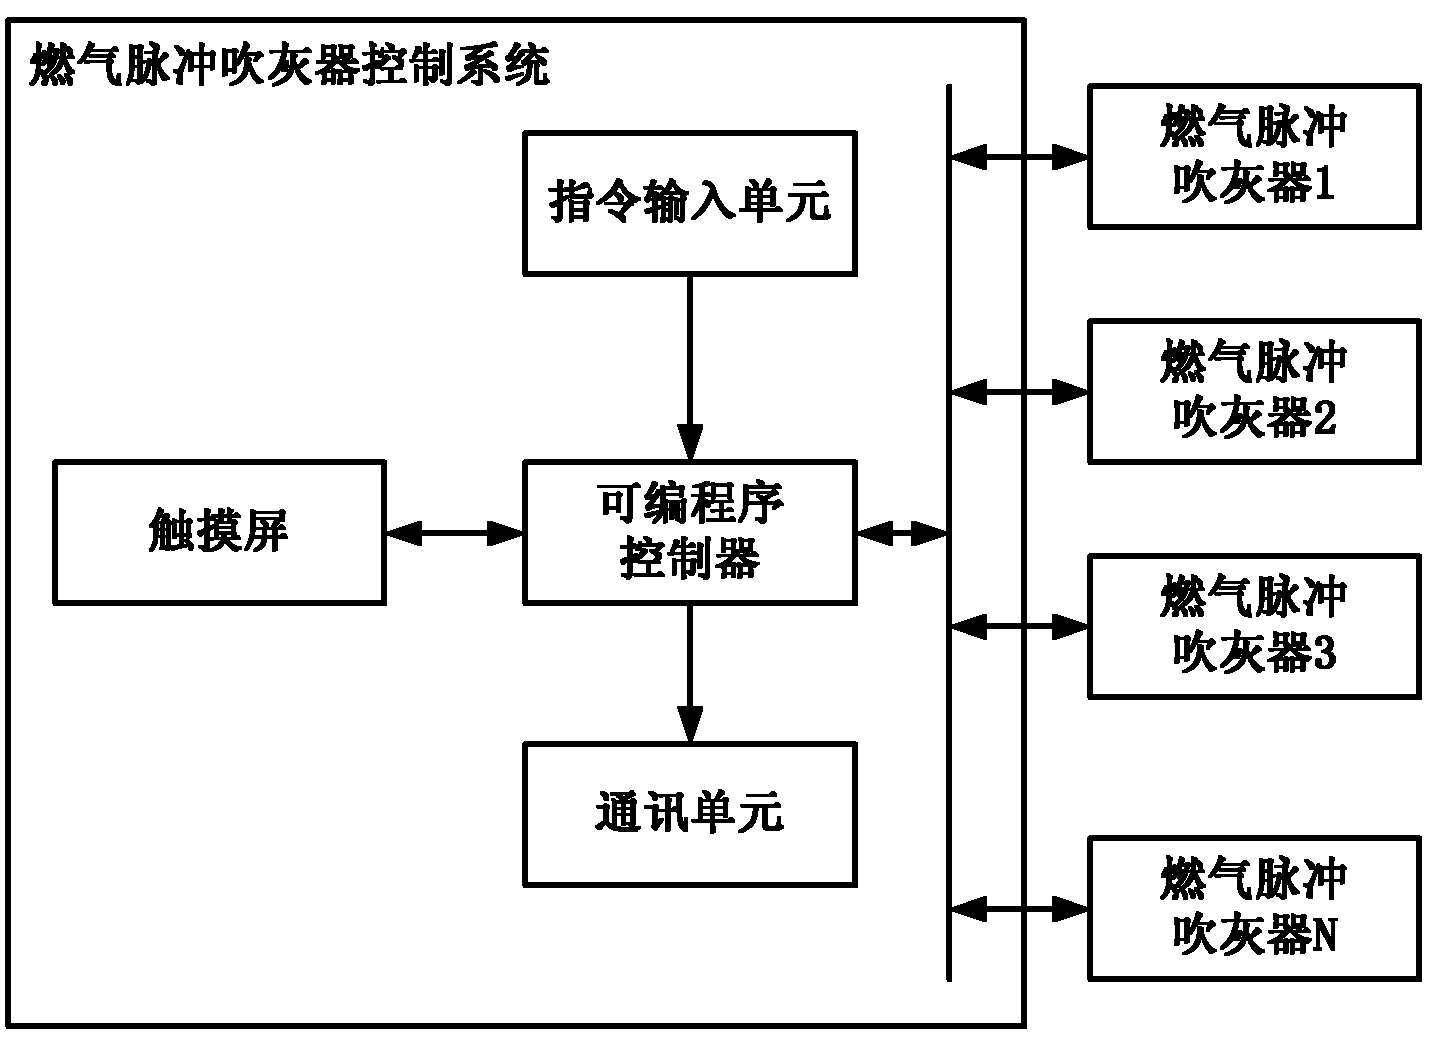 Operation control system for combustion gas pulse soot blower